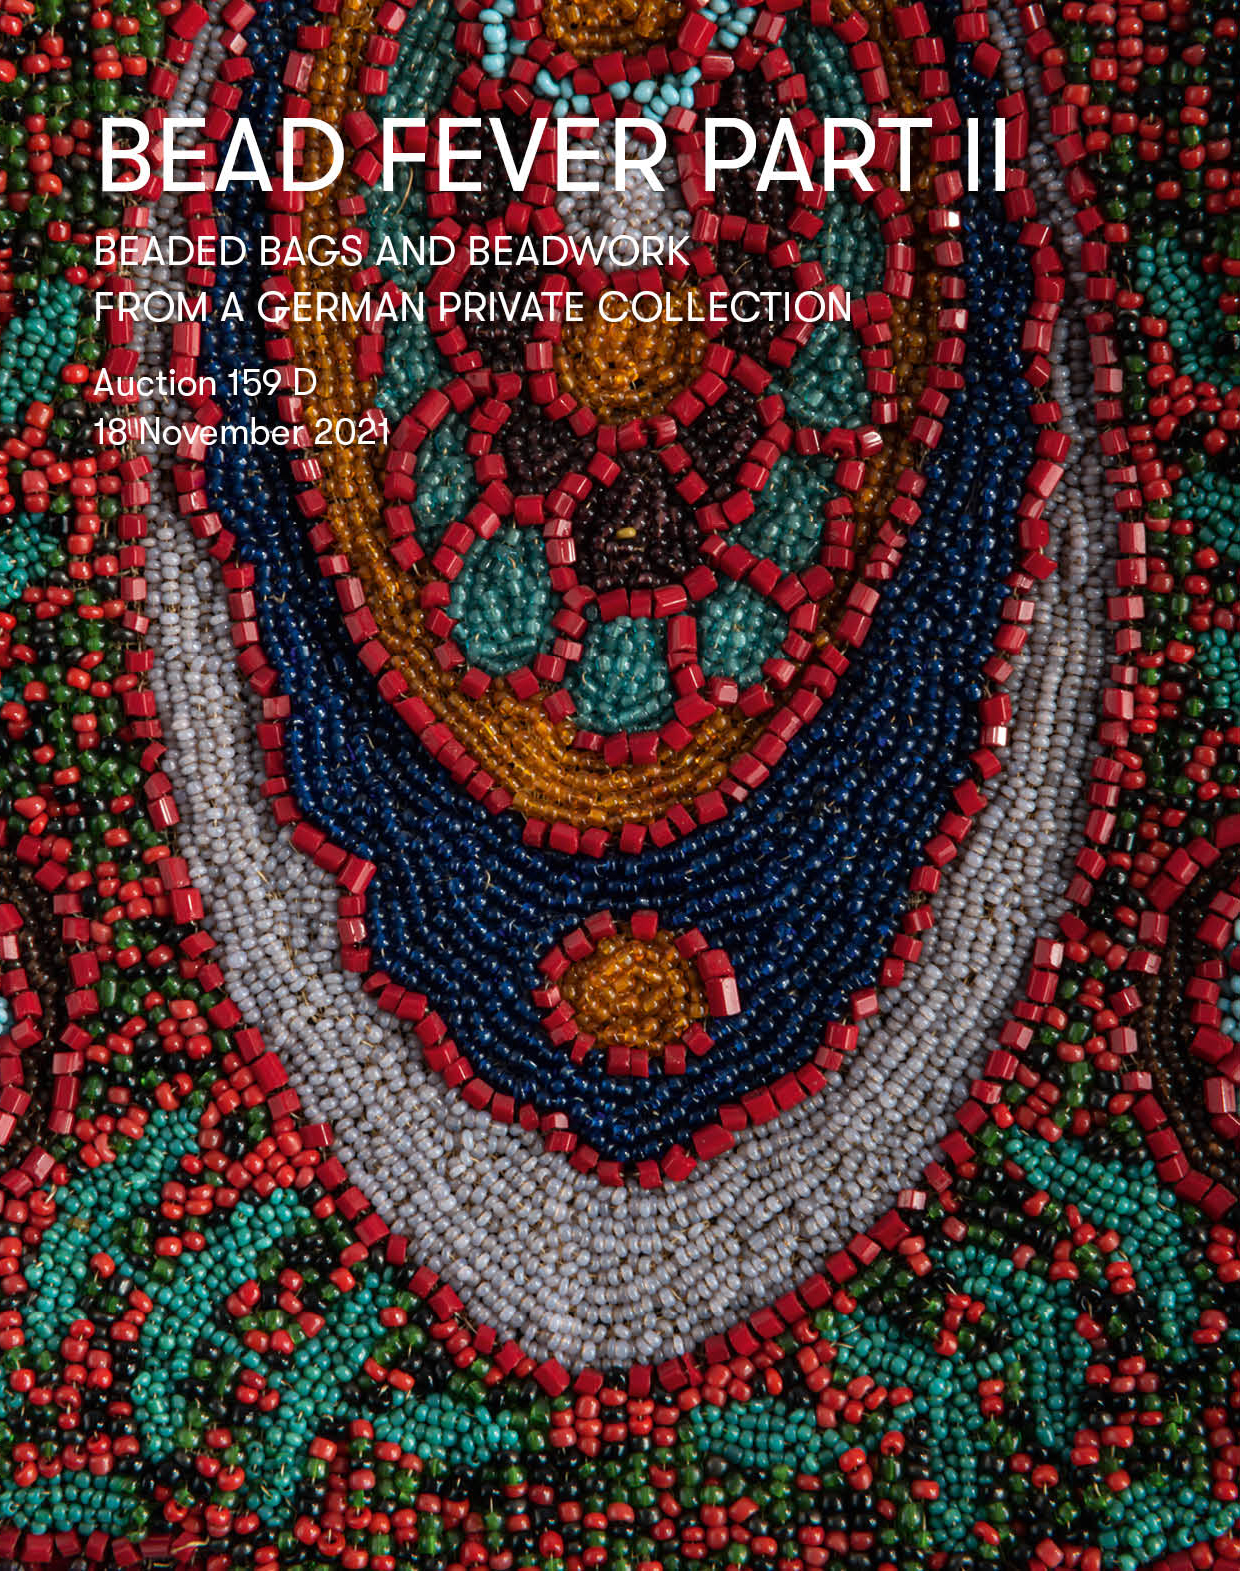 Bead Fever Part II. Beaded Bags and Beadwork from a German Private Collection